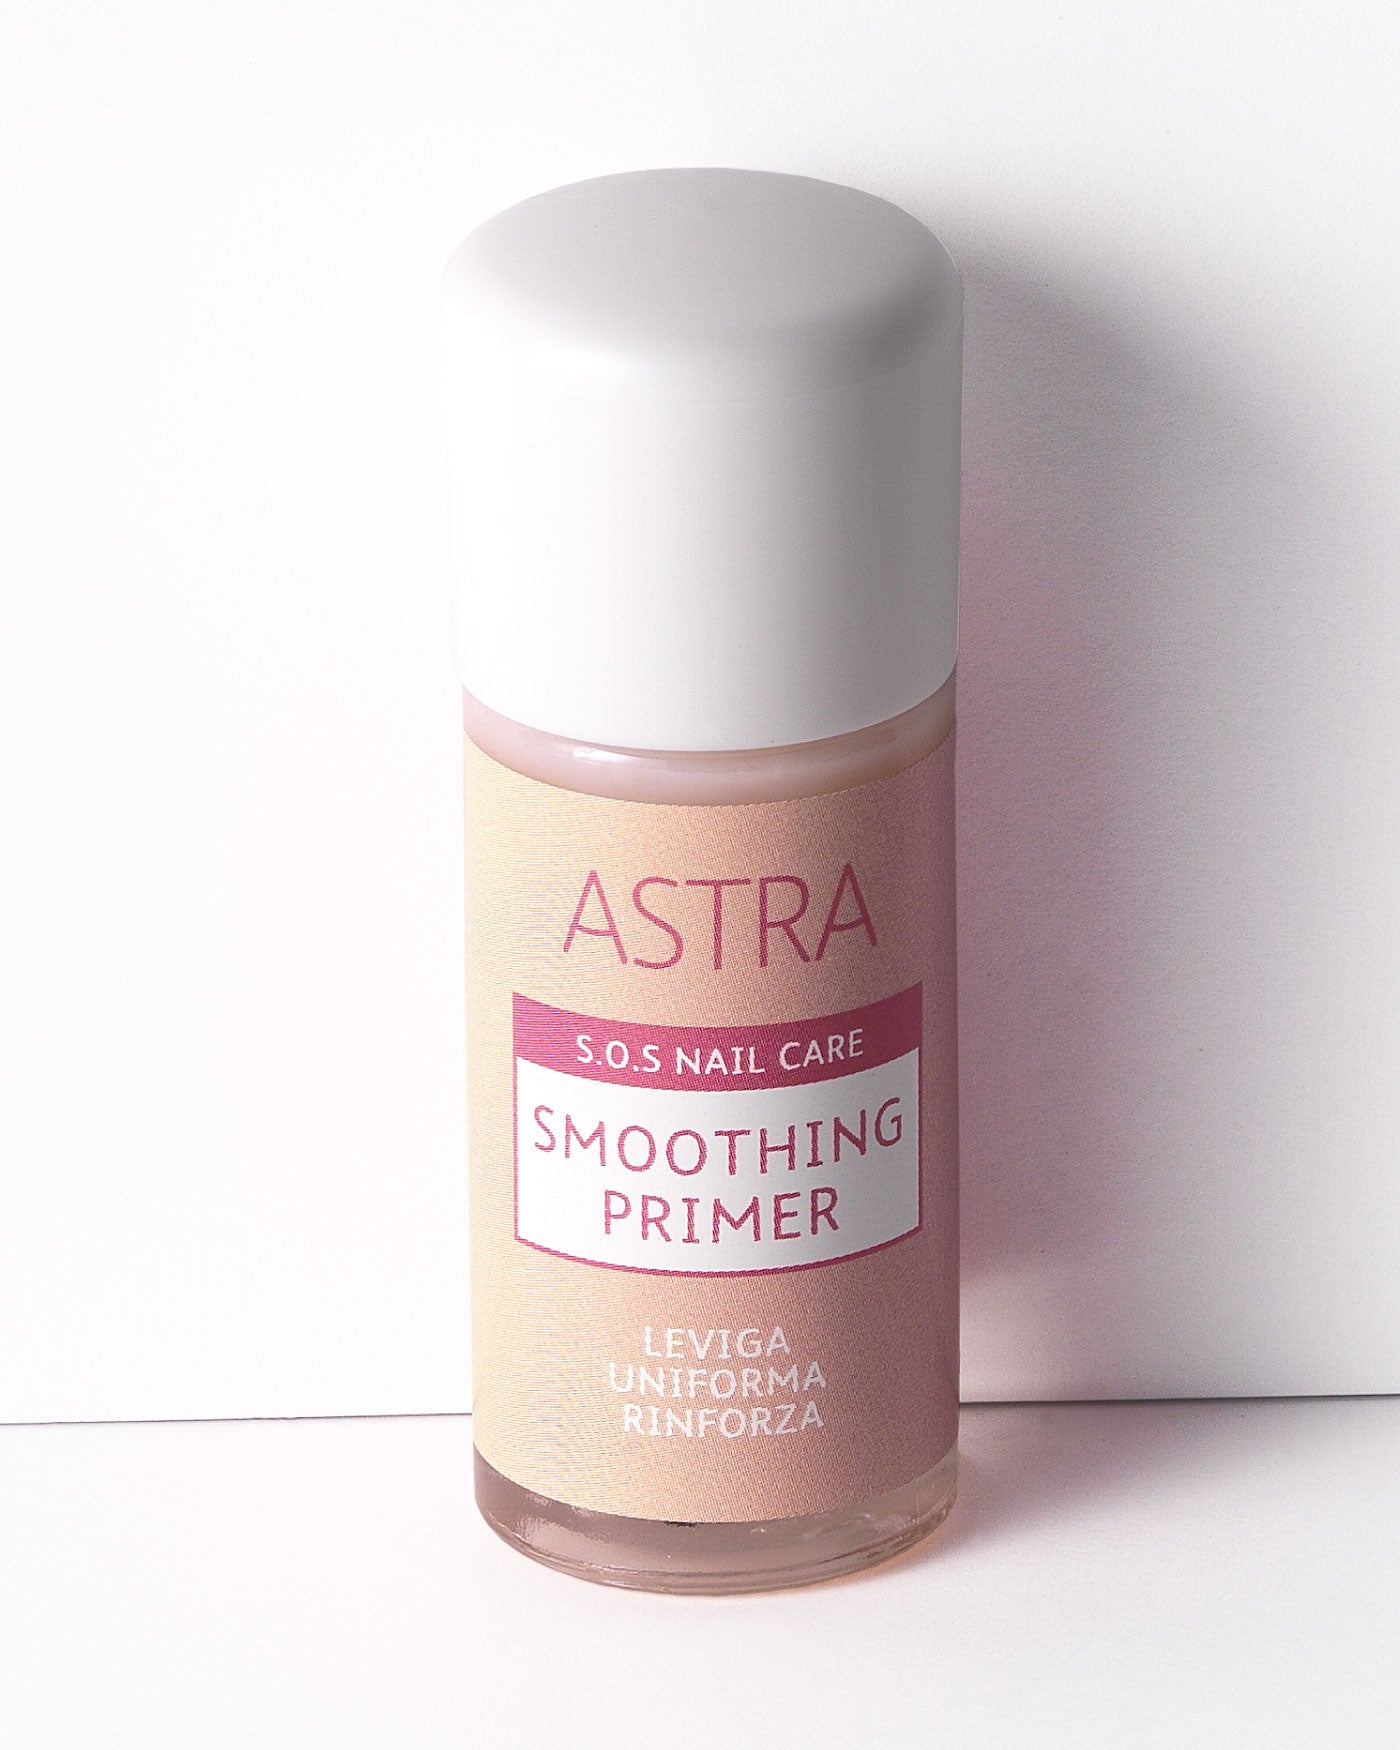 S.O.S NAIL CARE -  SMOOTHING PRIMER - All Products - Astra Make-Up